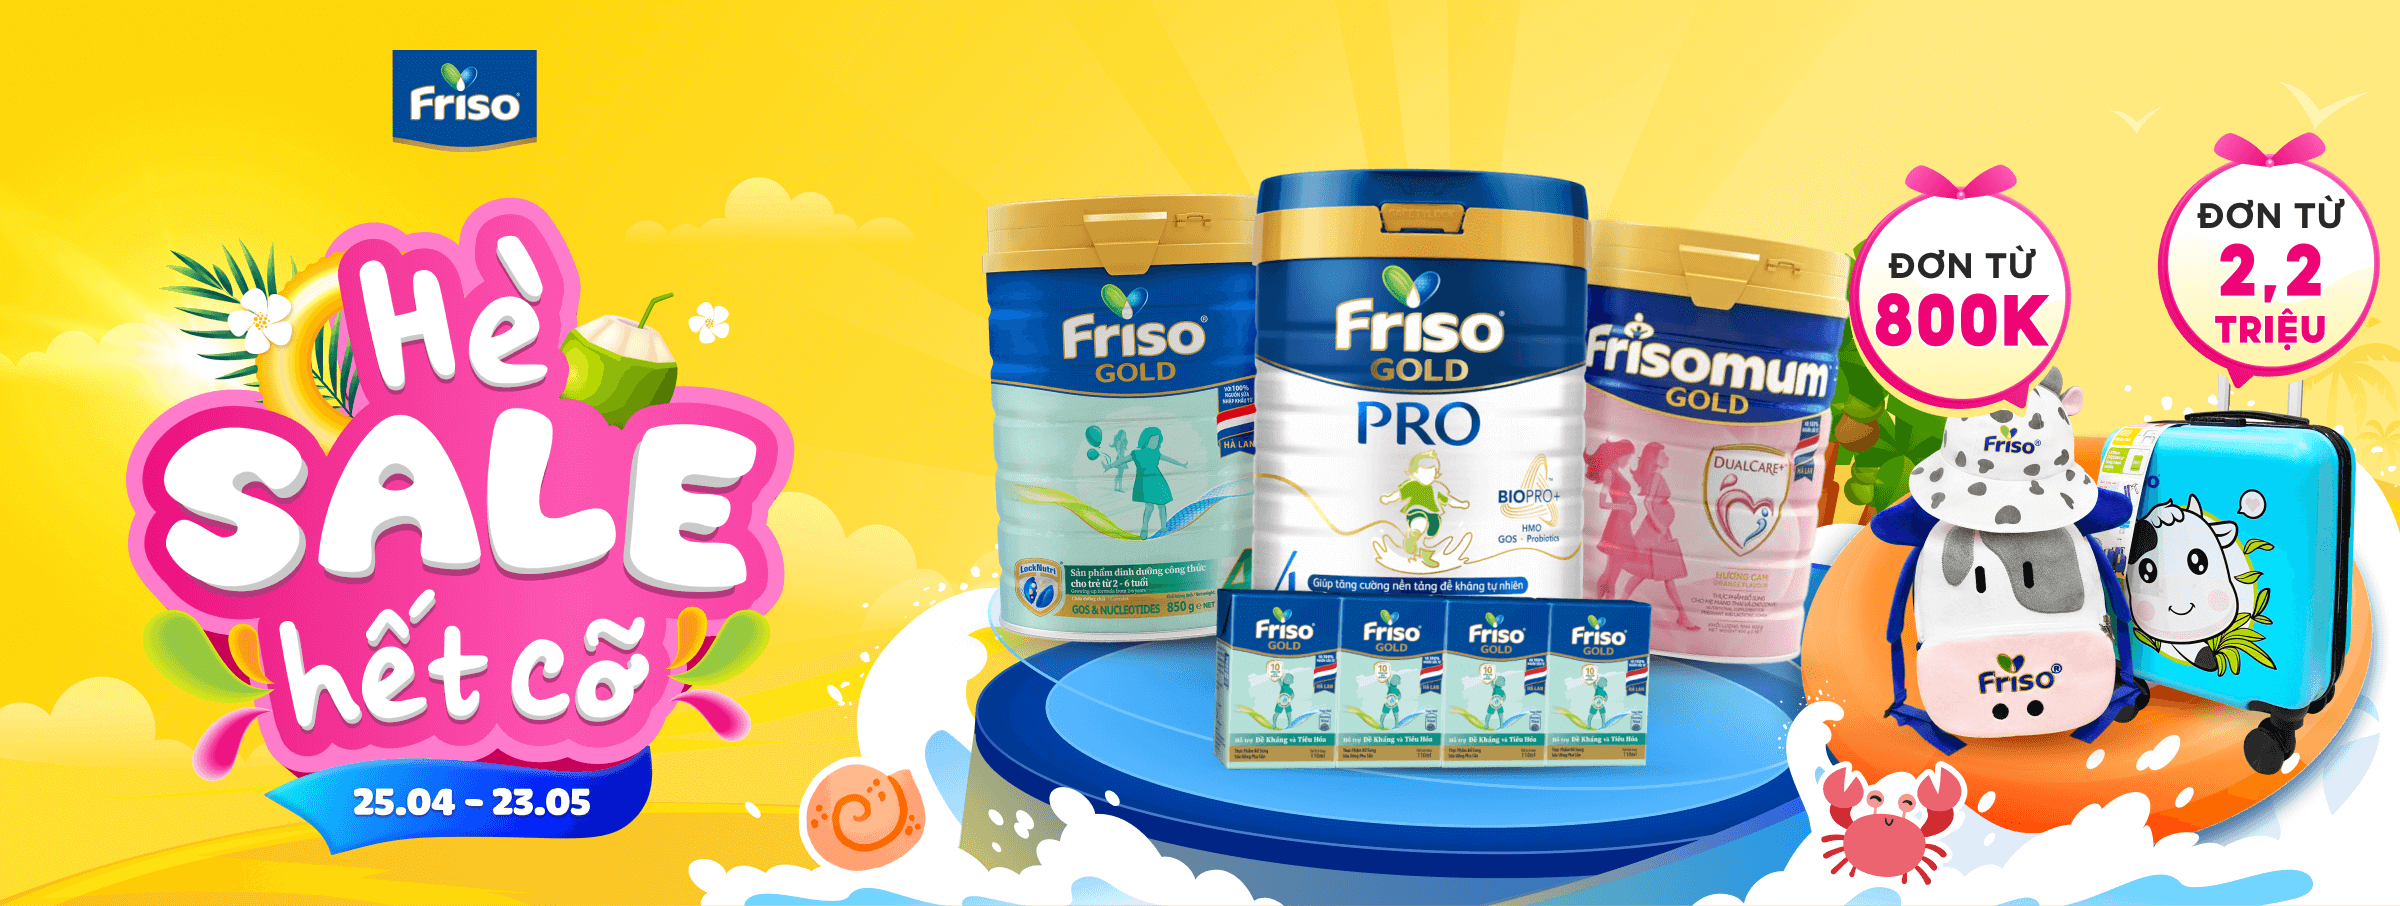 Friso - CATE - T05